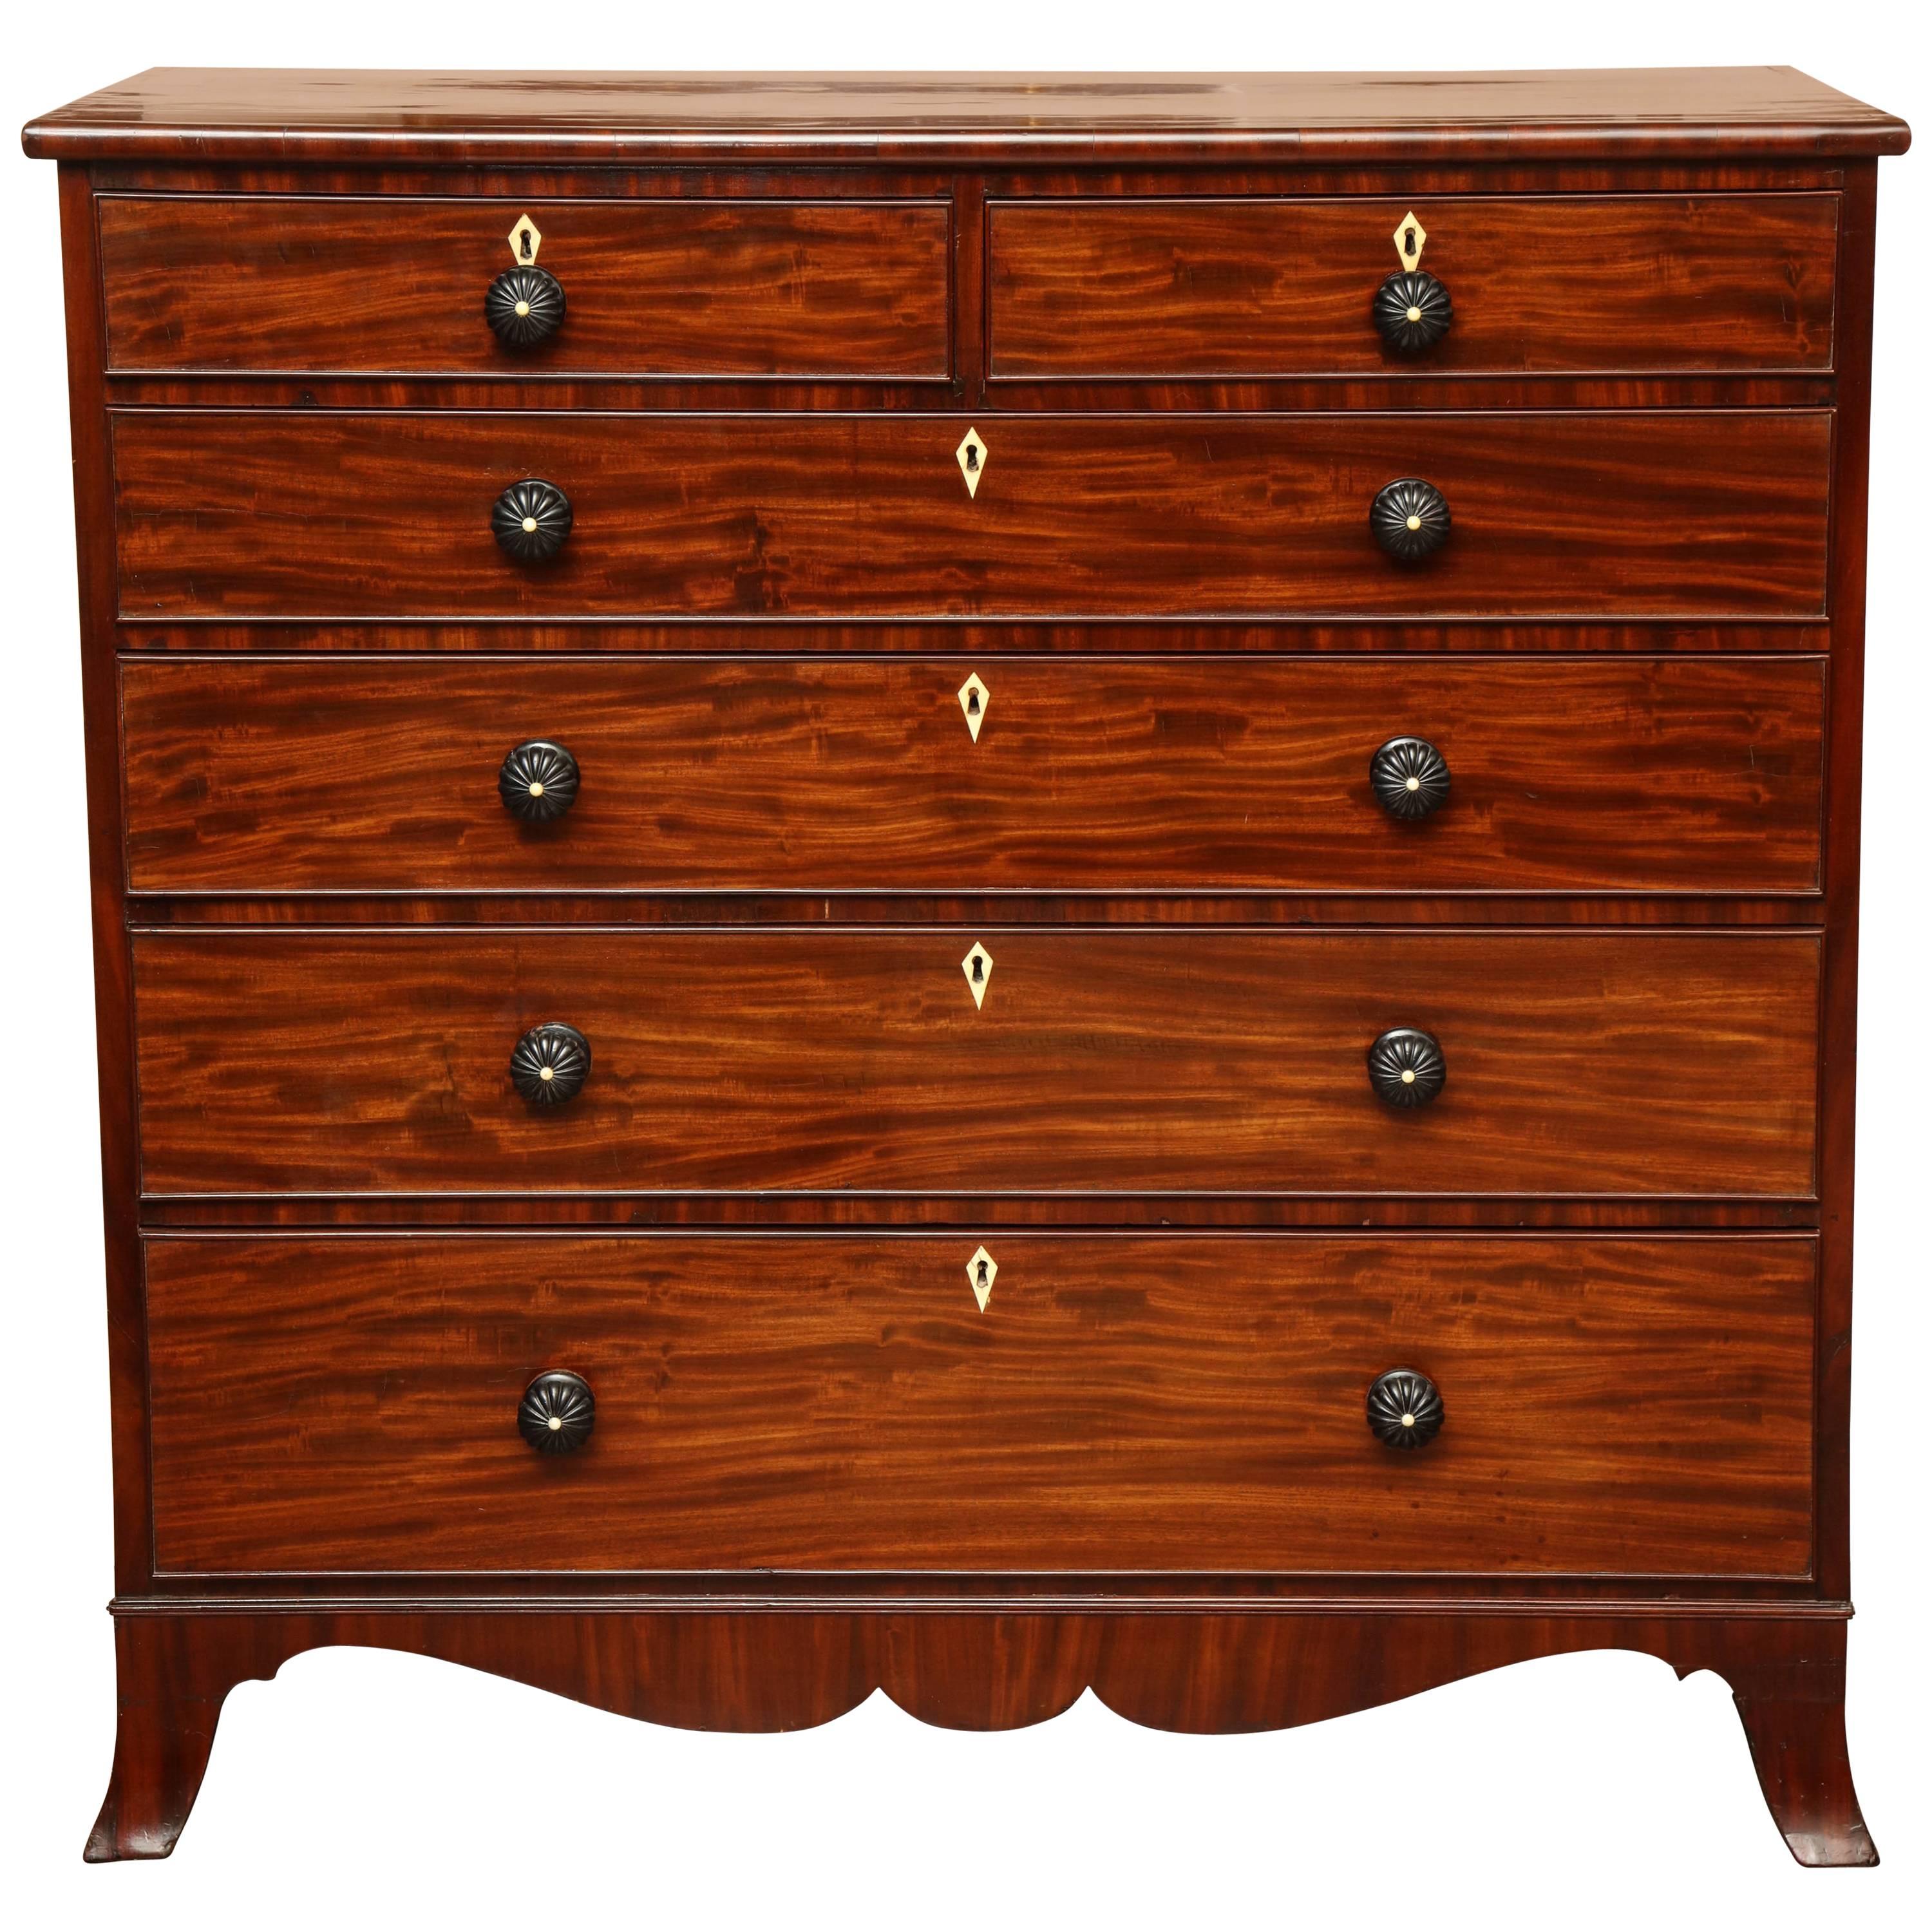 Early 19th Century English Regency, Mahogany Chest of Drawers